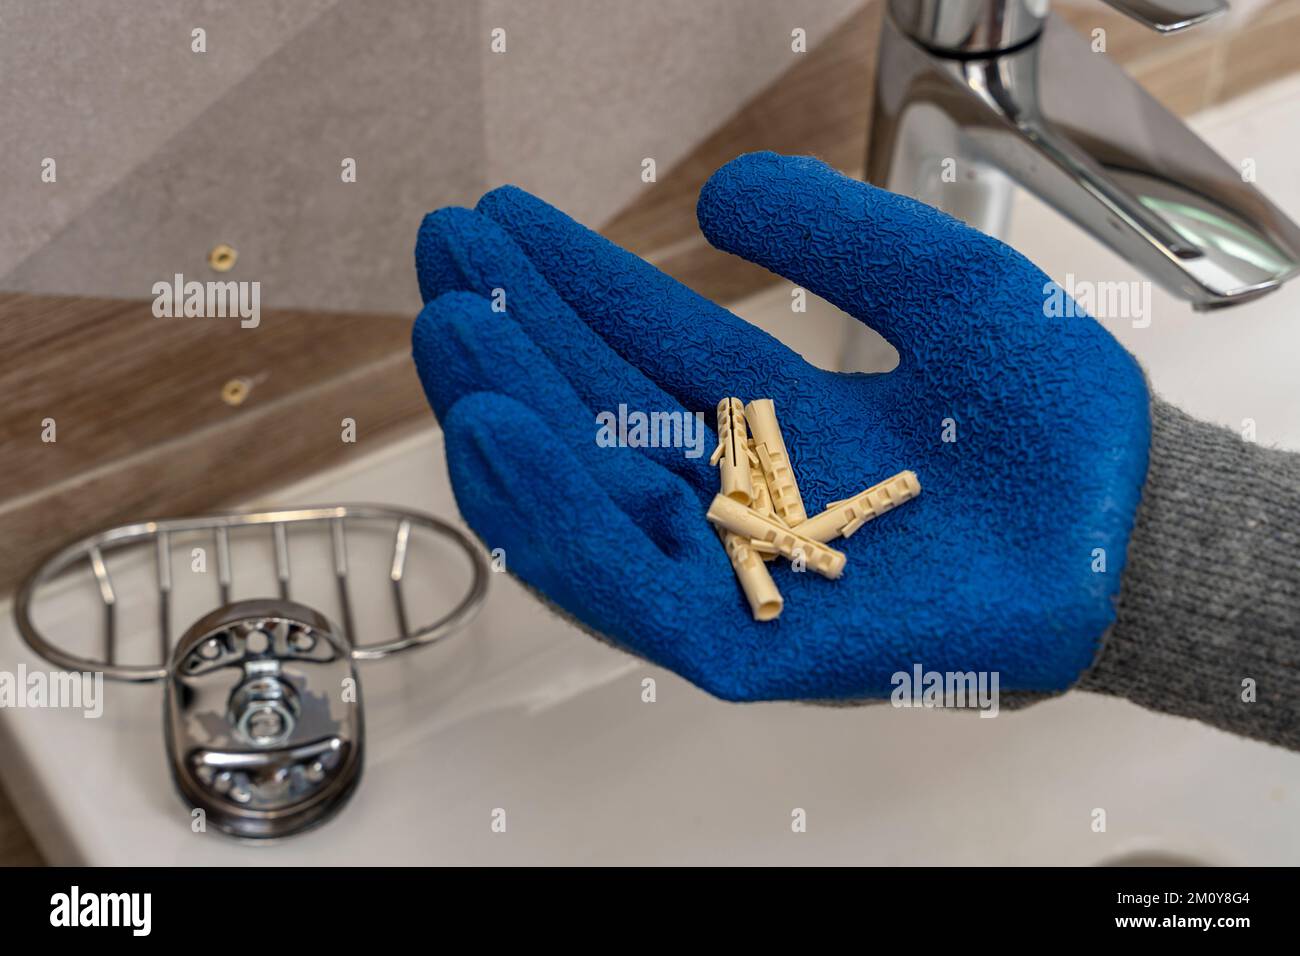 worker's hand in a protective glove holds several plastic dowel pins Stock Photo